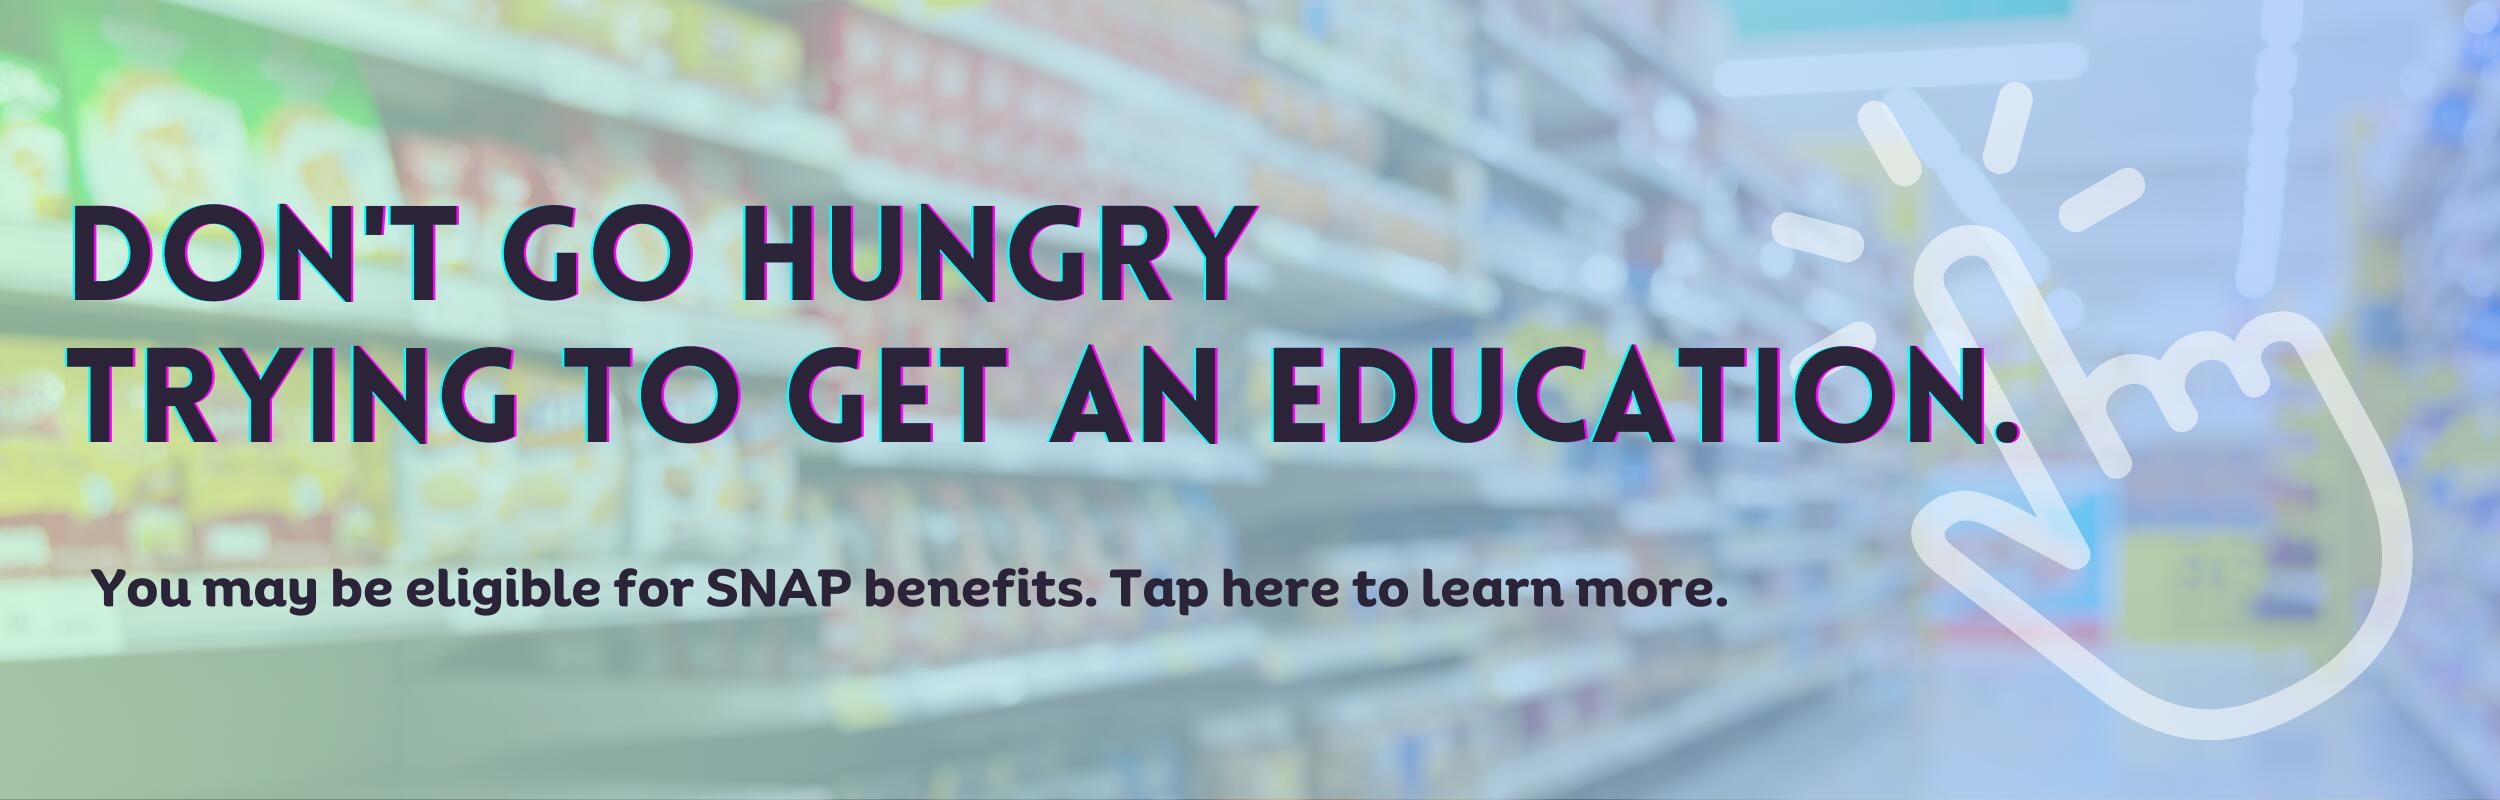 Grocery store aisle with overlaying text that reads "Don't go hungry trying to get an education. You may be eligible for SNAP benefits. Tap here to learn more."